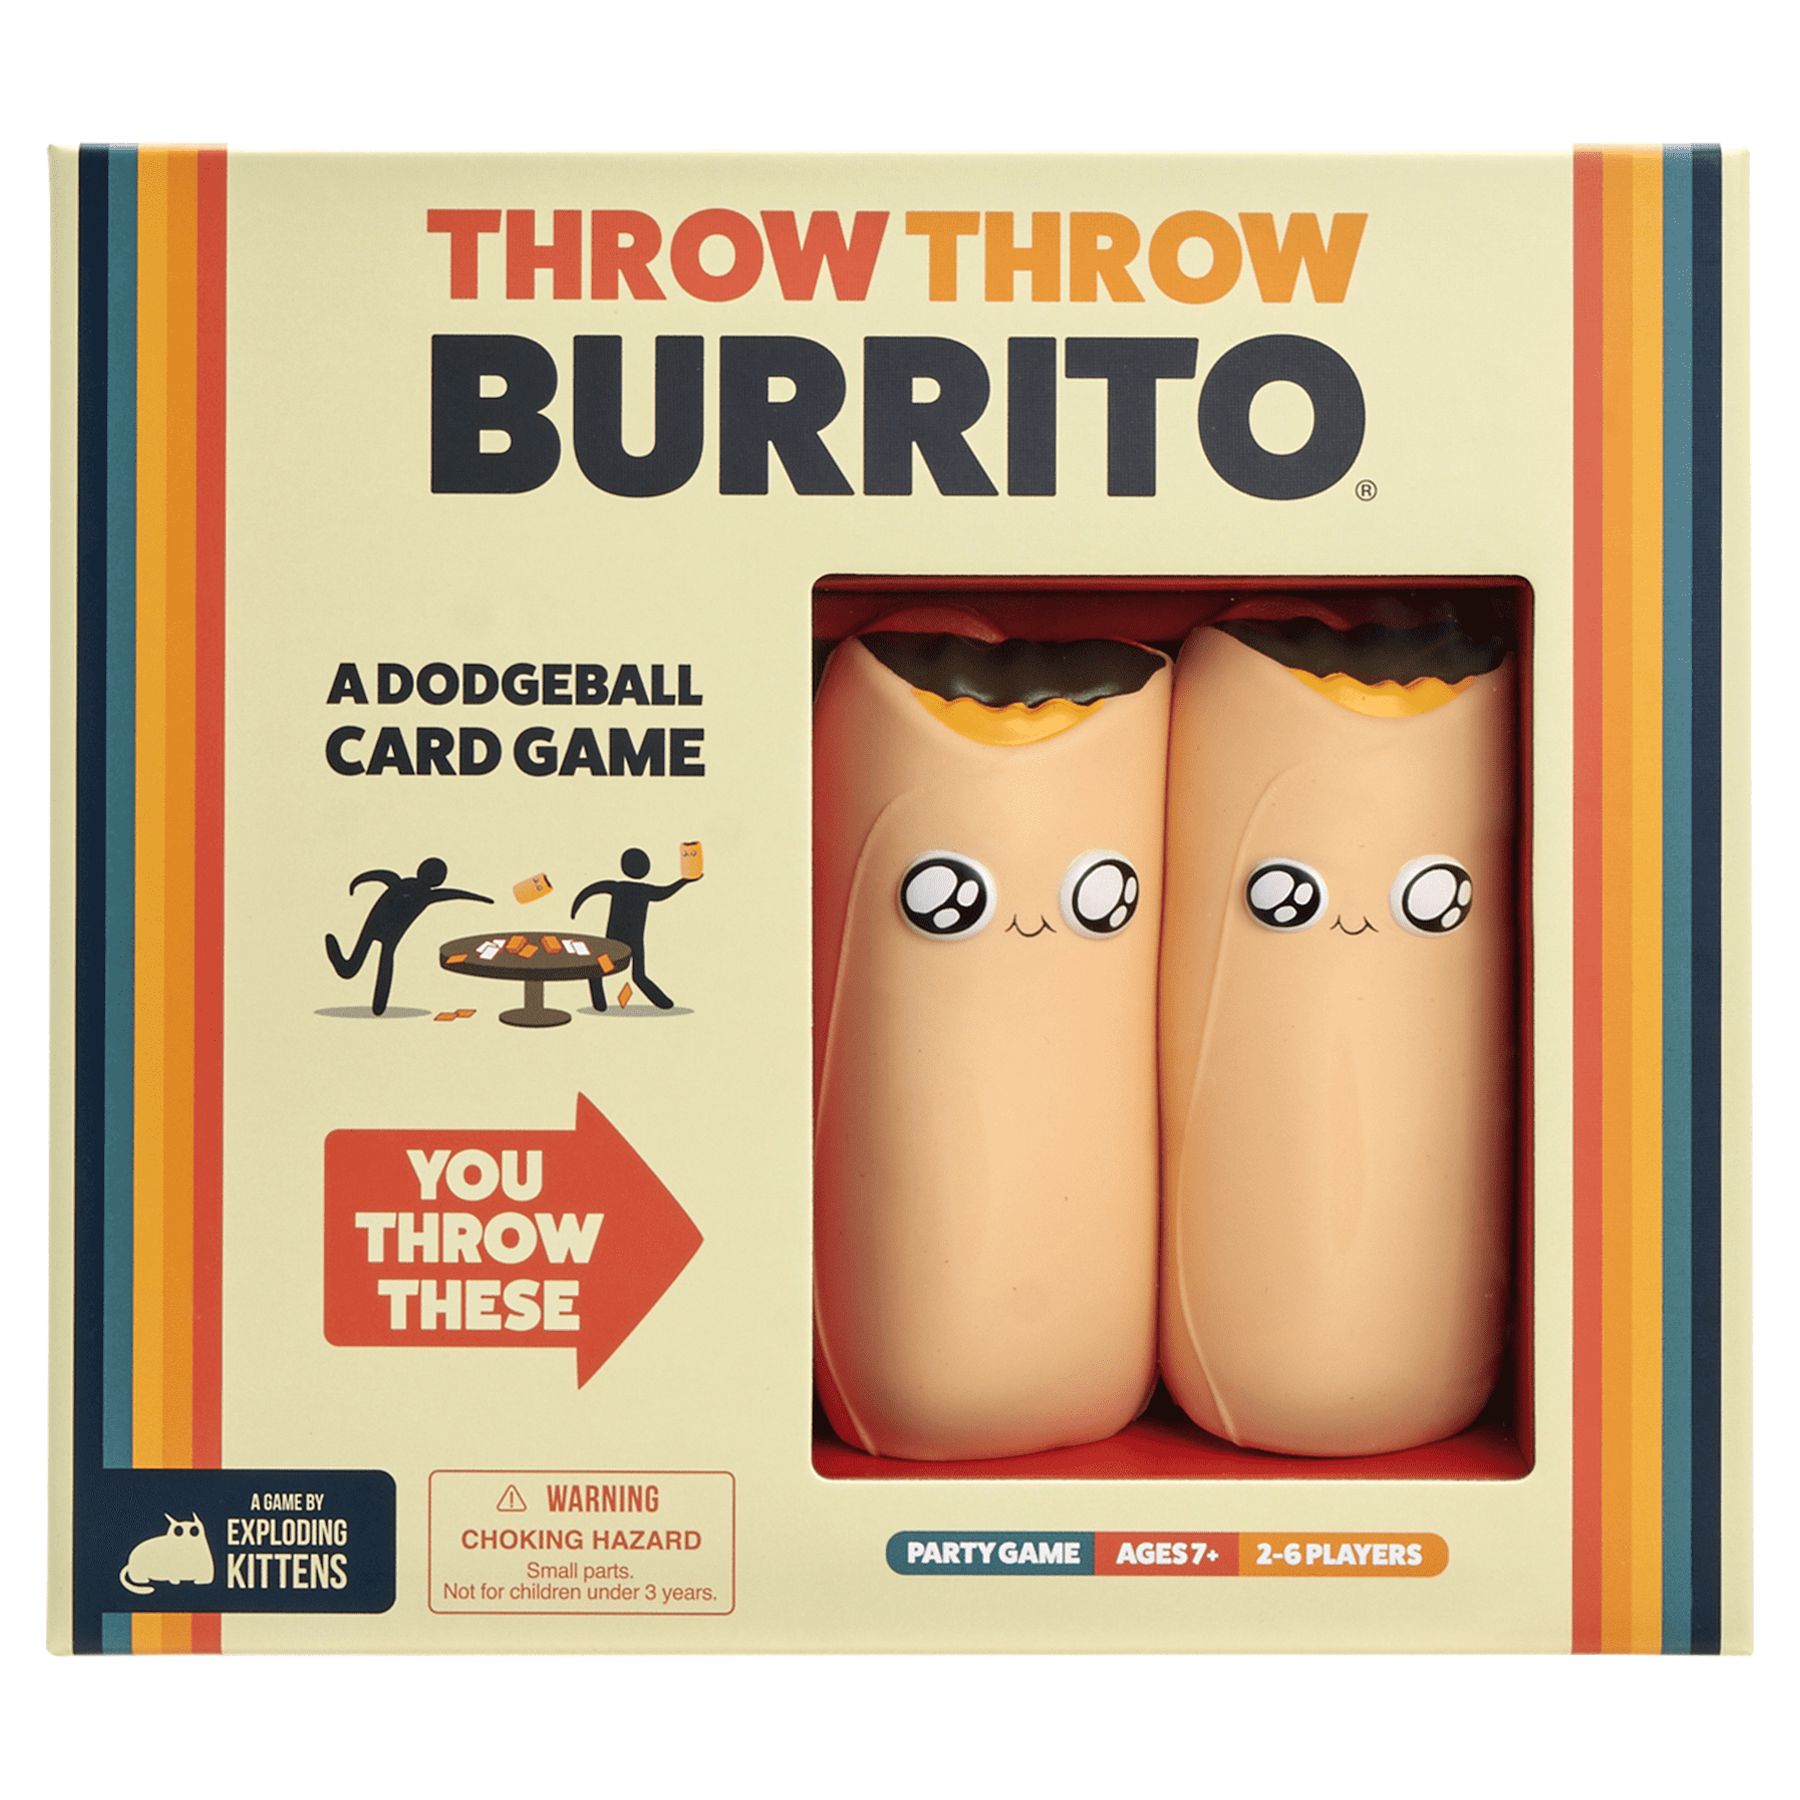 Throw Throw Burrito by Exploding Kittens - A Dodgeball Card Game - Family-Friendly Party Games - for Adults, Teens & Kids - 2-6 Players - image 1 of 6